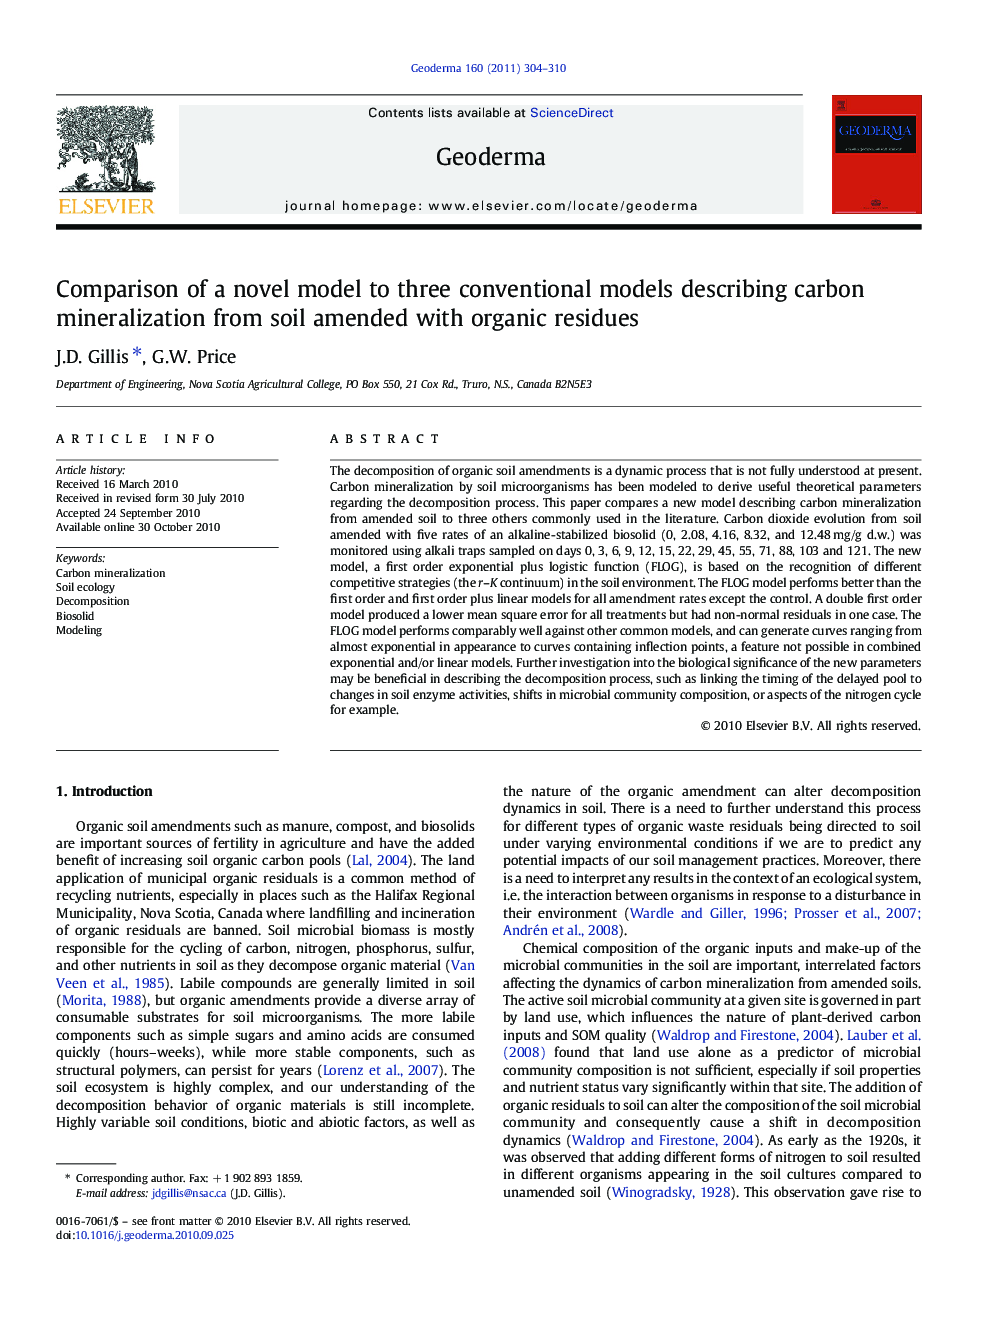 Comparison of a novel model to three conventional models describing carbon mineralization from soil amended with organic residues